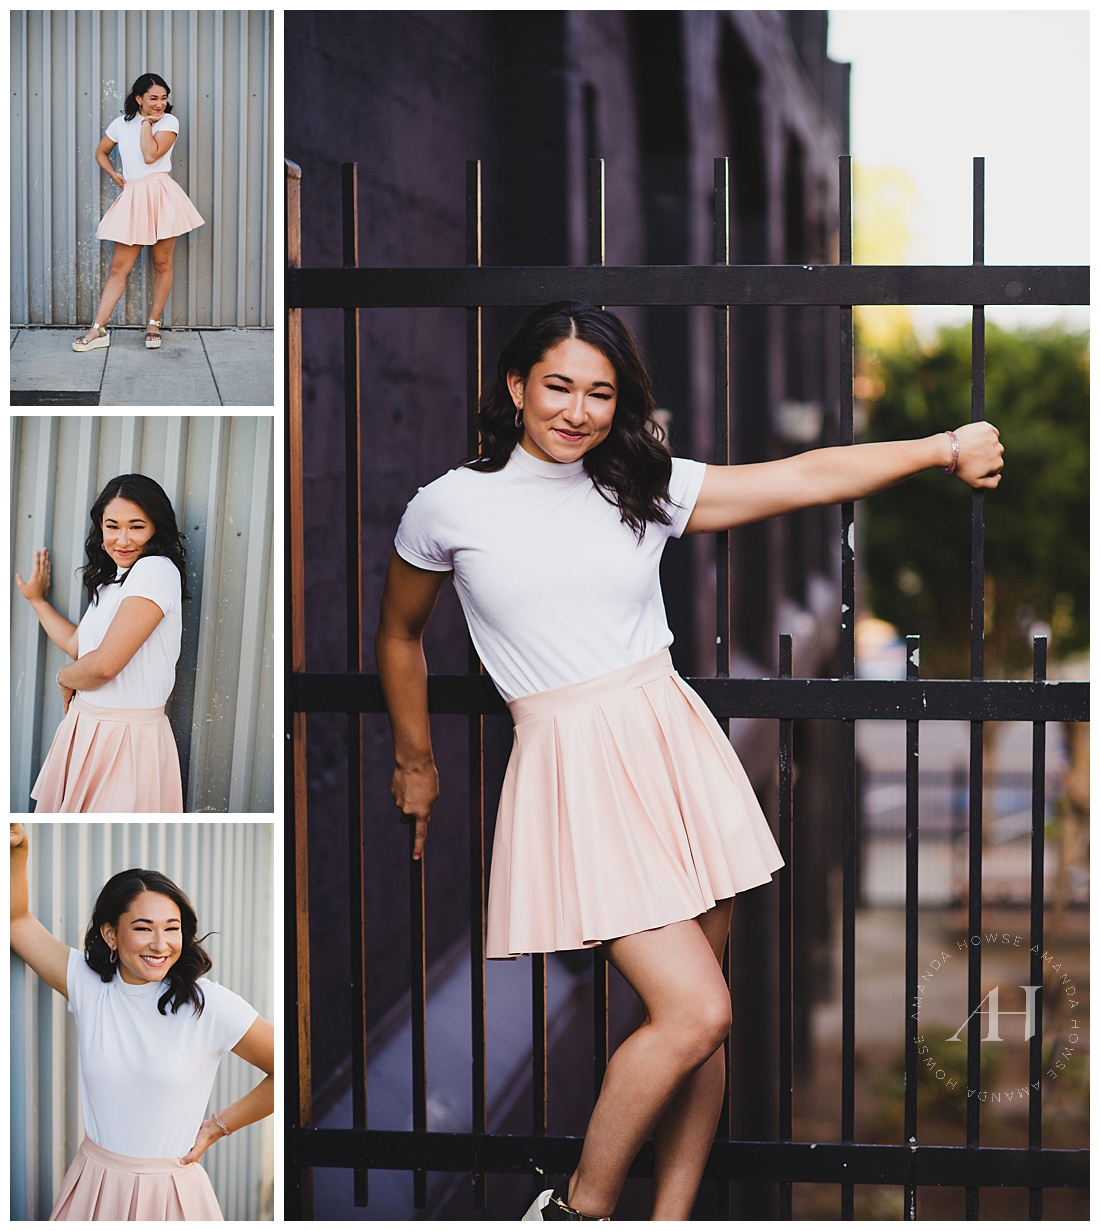 Sassy senior portraits with cute pleather skirt and blouse photographed in Opera Alley by Amanda Howse